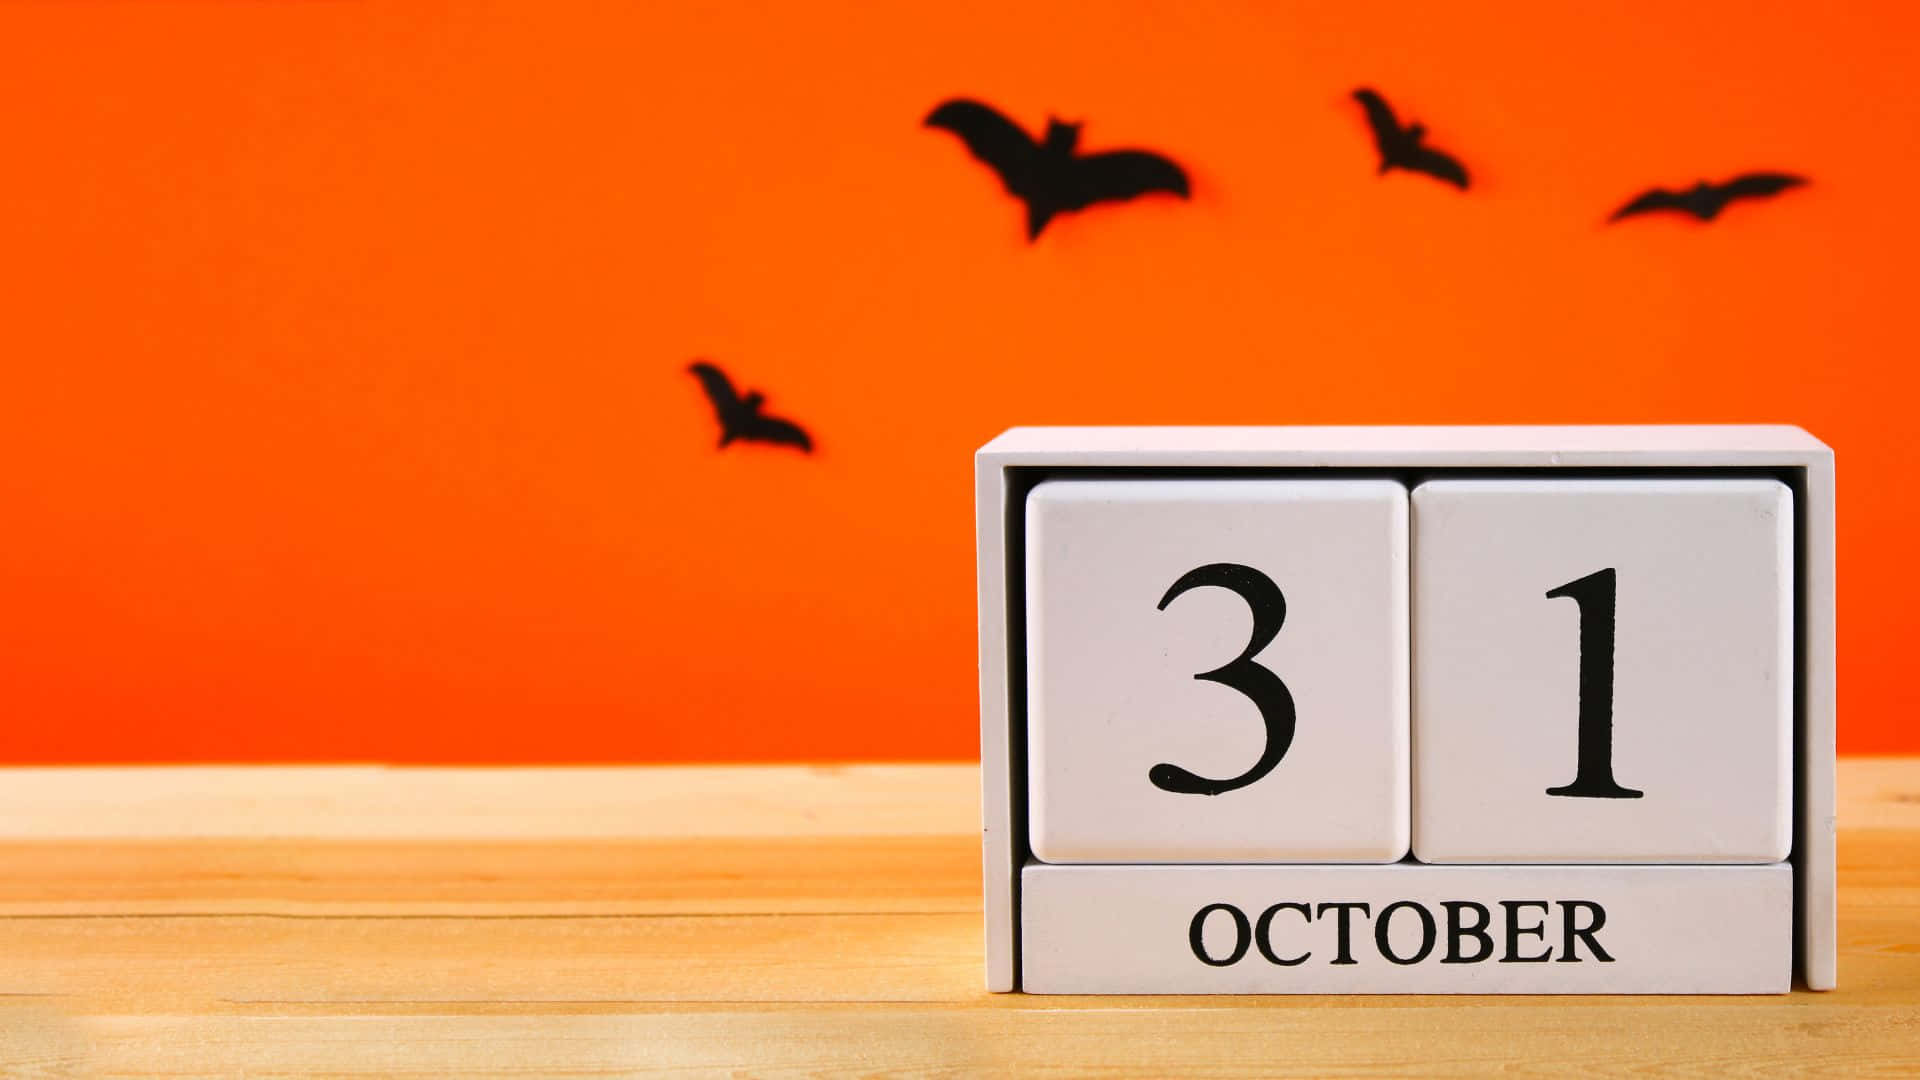 Haunted houses, pumpkins and fun - It's October 31st! Wallpaper